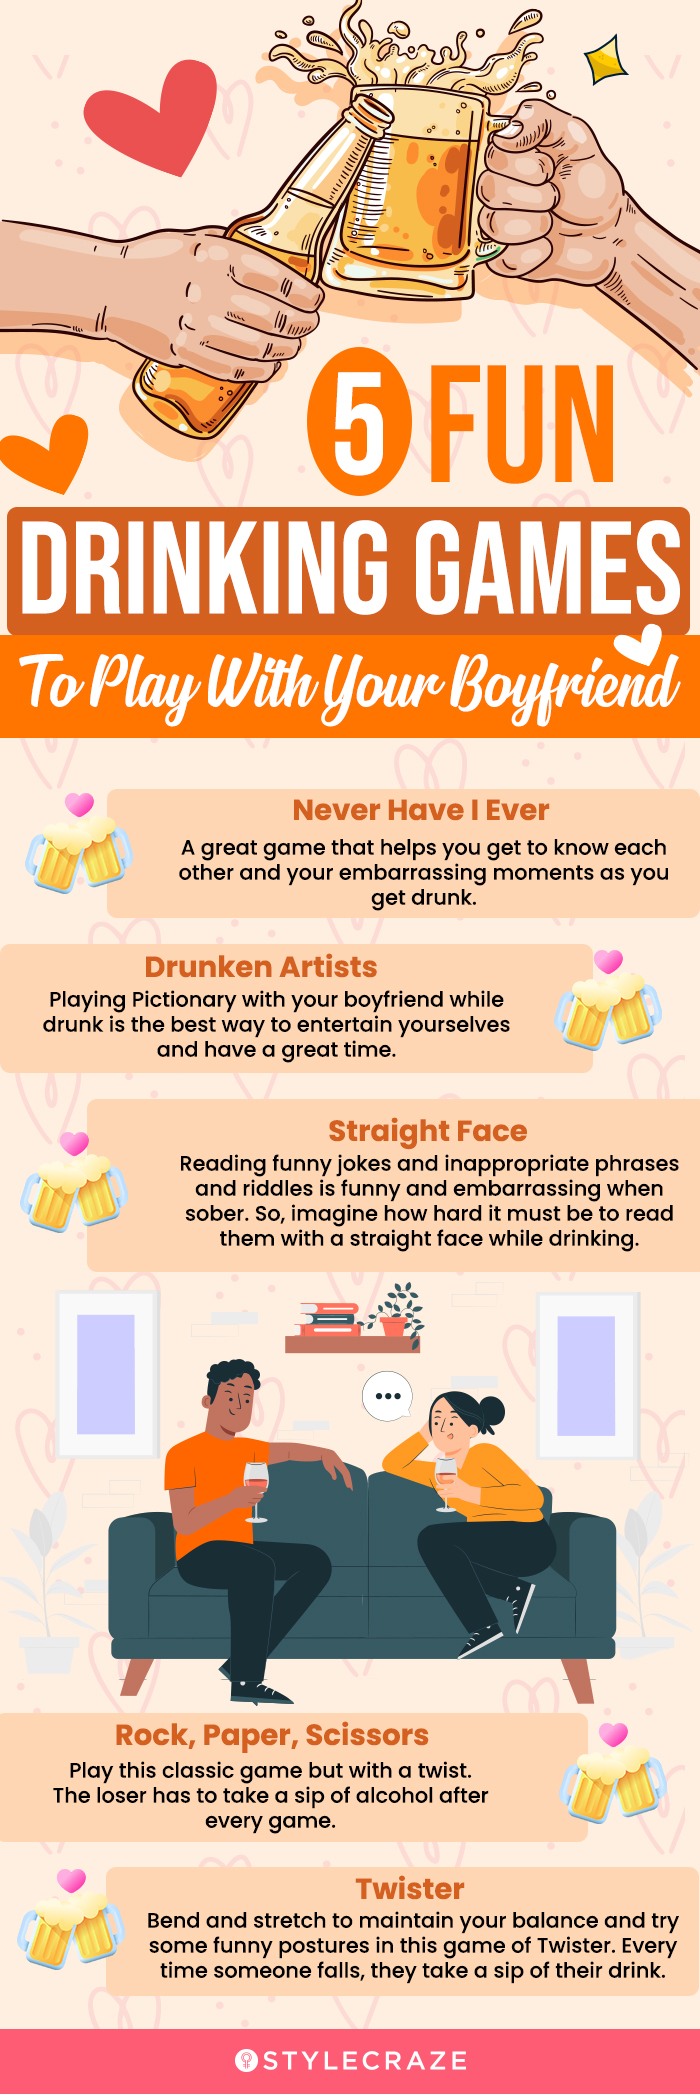 30 Interesting And Fun Games To Play With Your Boyfriend